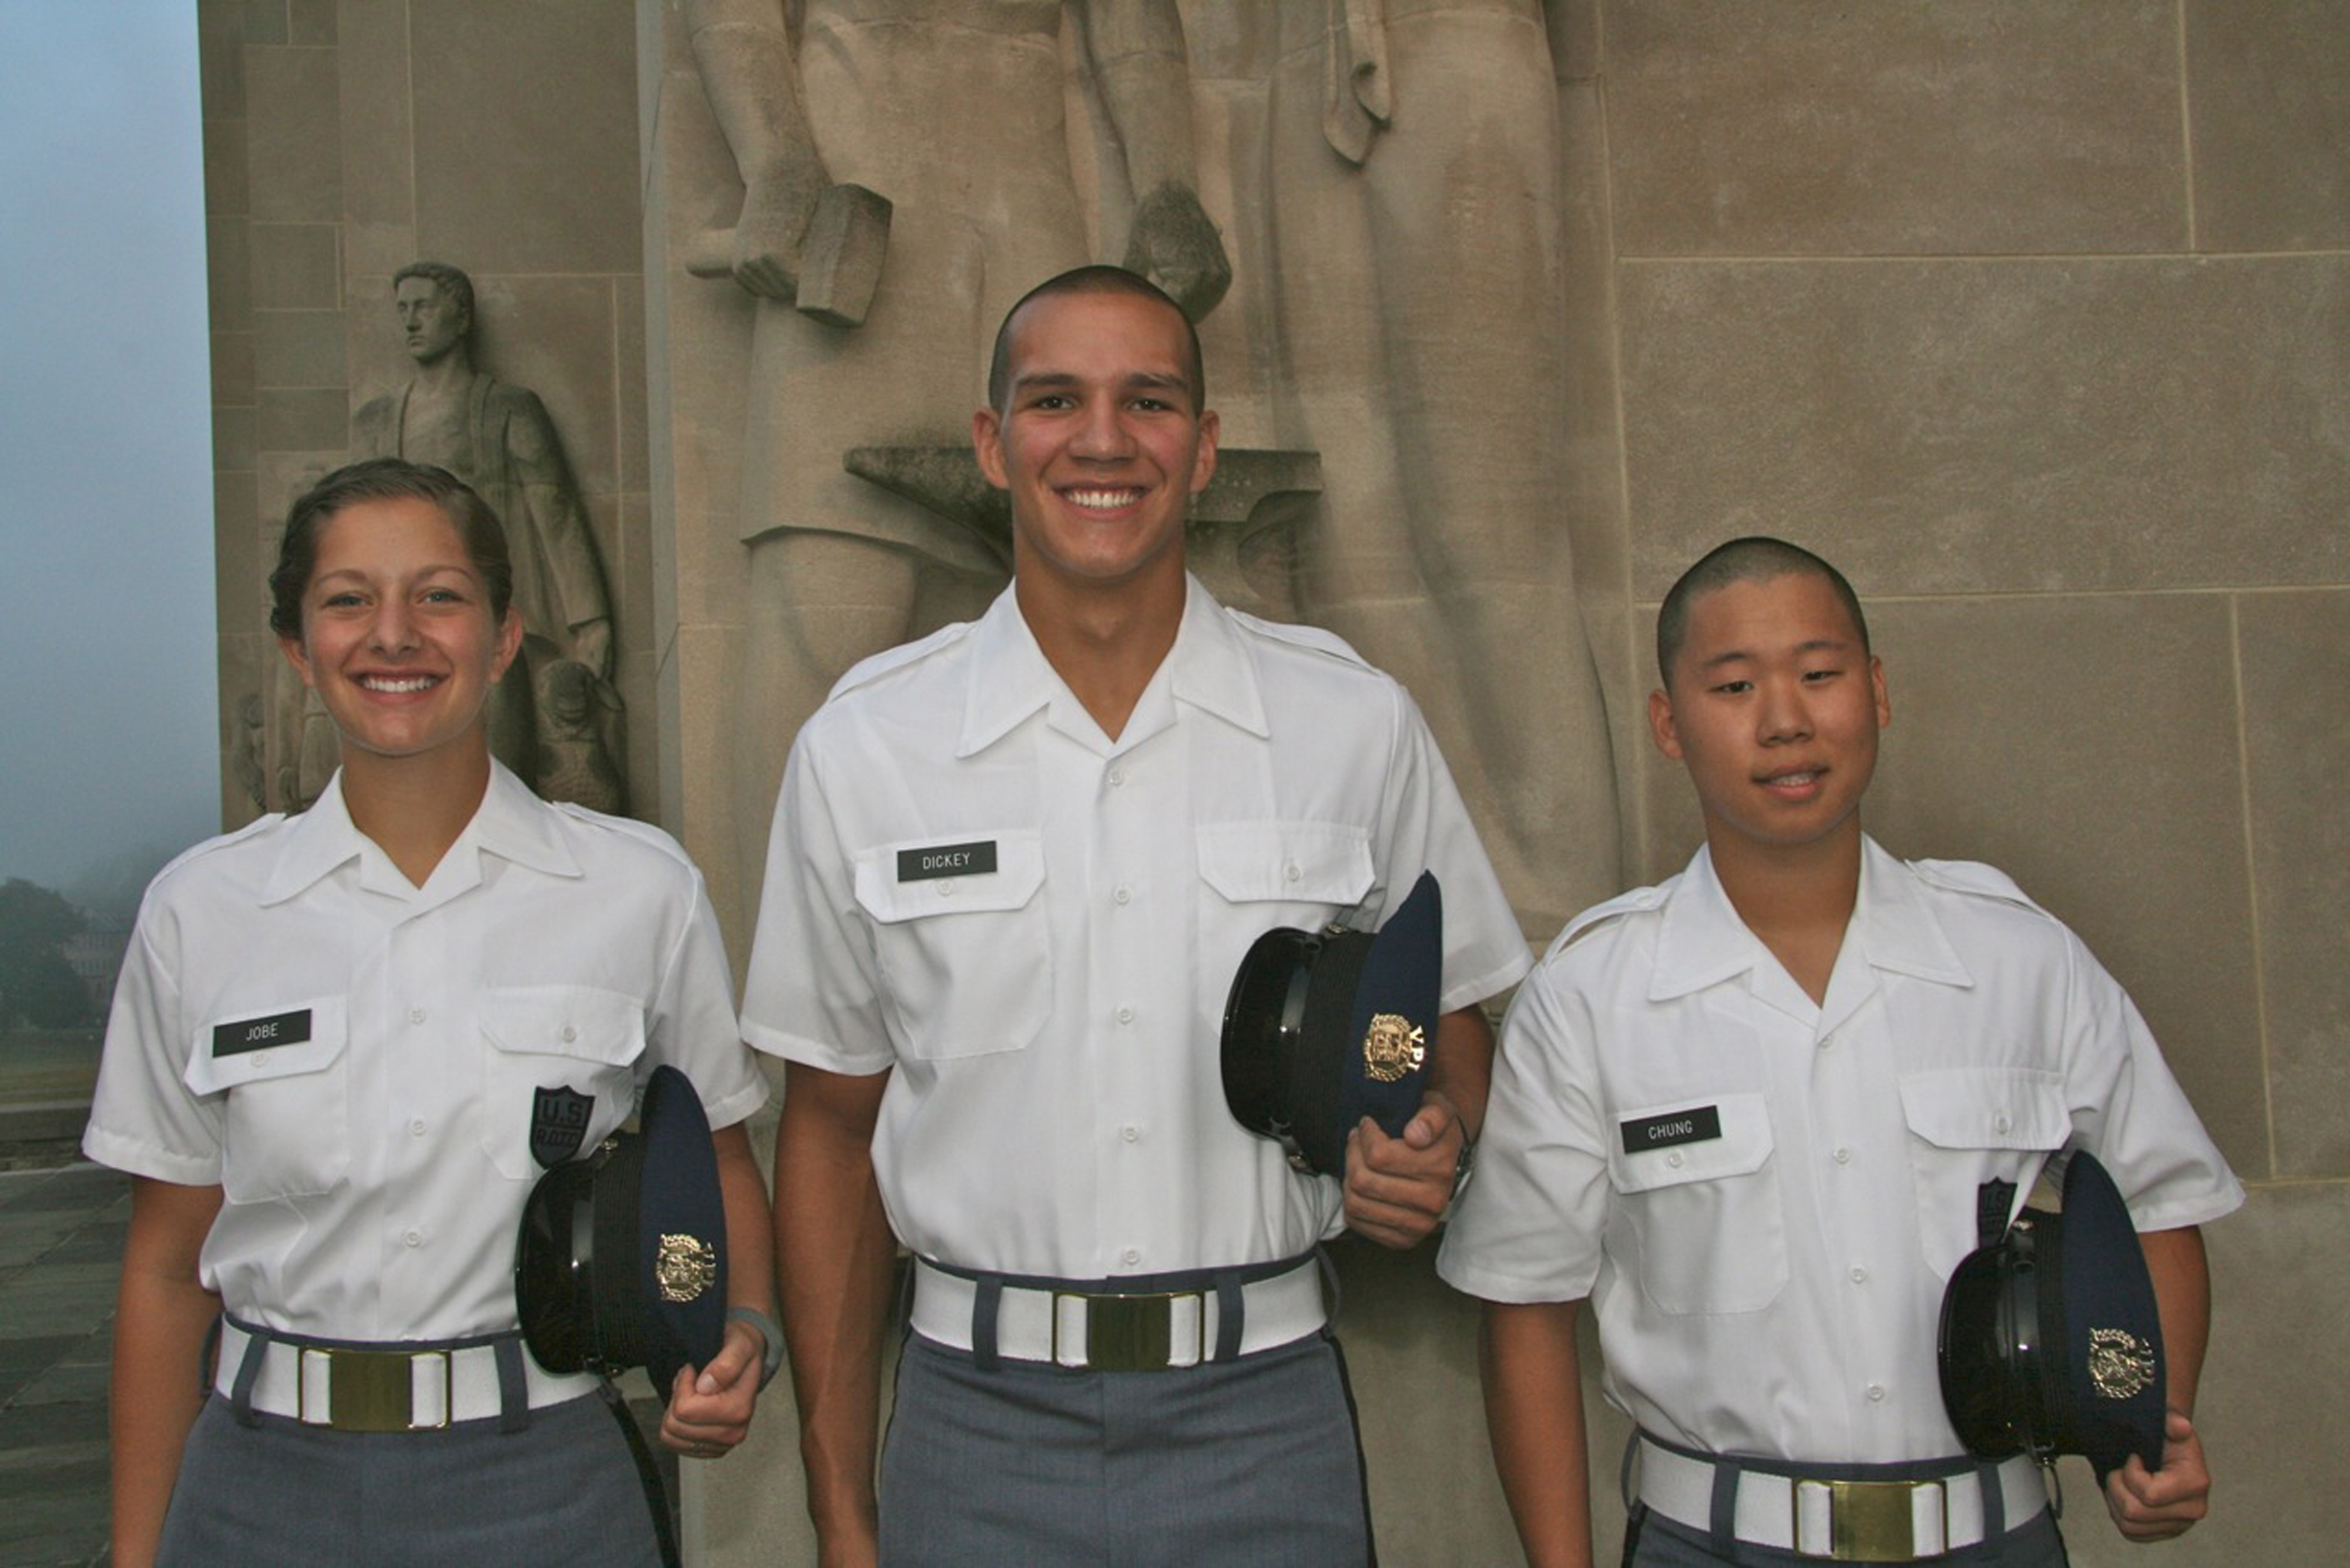 From left to right are Cadets Emily Jobe, Austin Dickey, and William Chung who have been selected to represent the Virginia Tech Corps of Cadets at the Appalachian State game